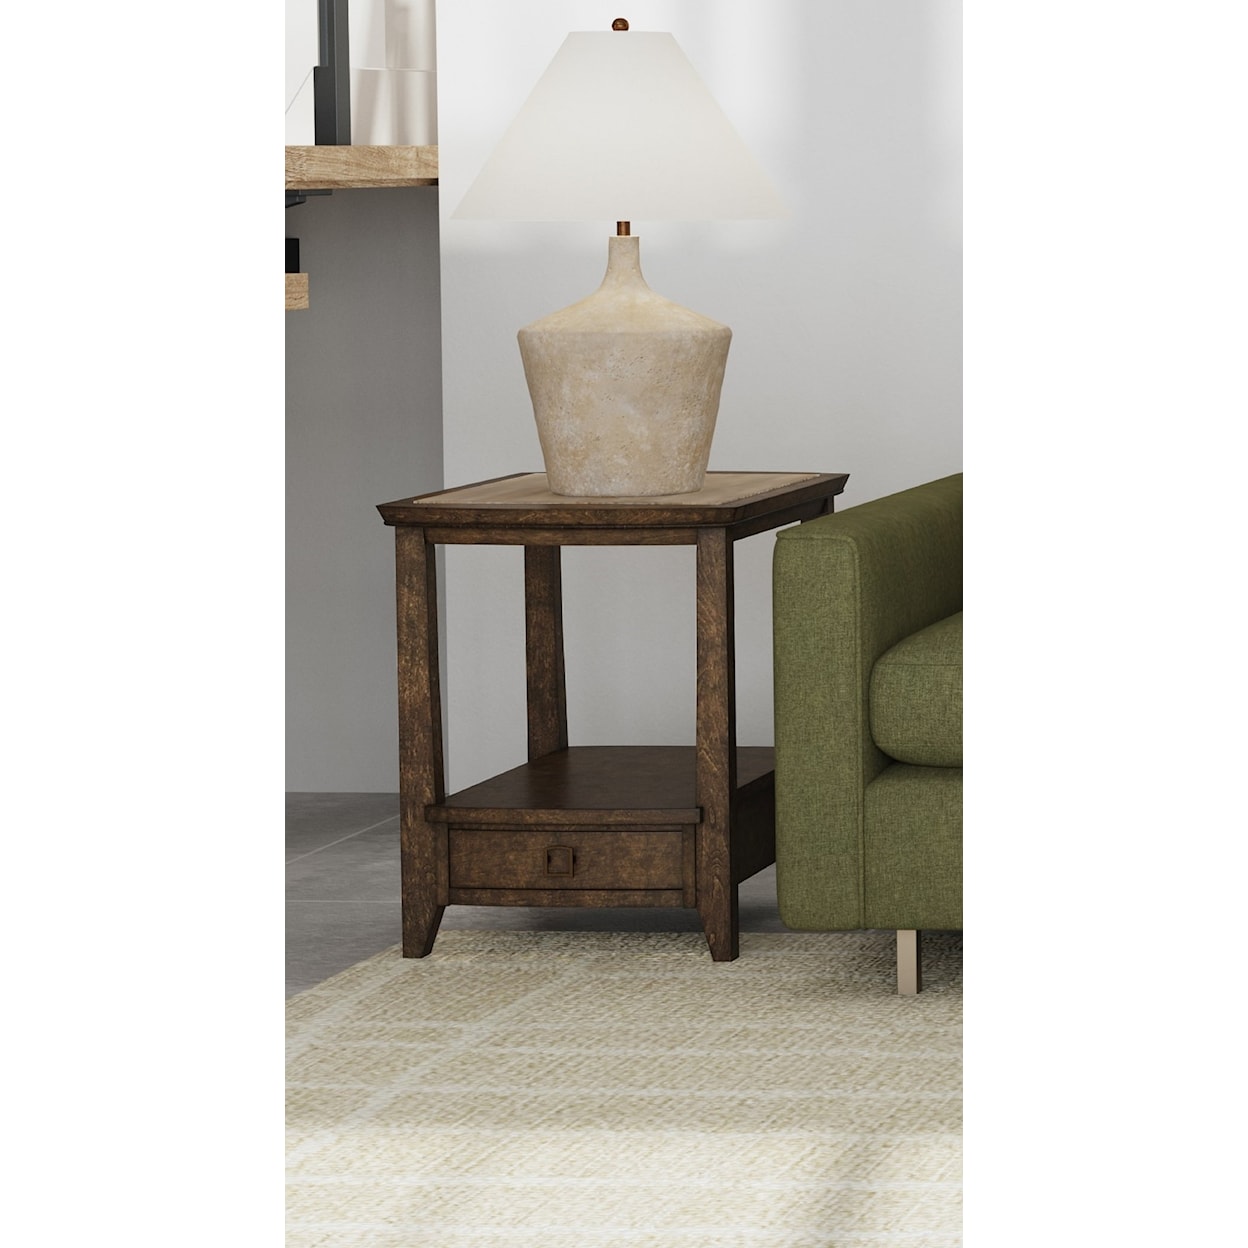 Null Furniture Woodmill Rectangular End Table